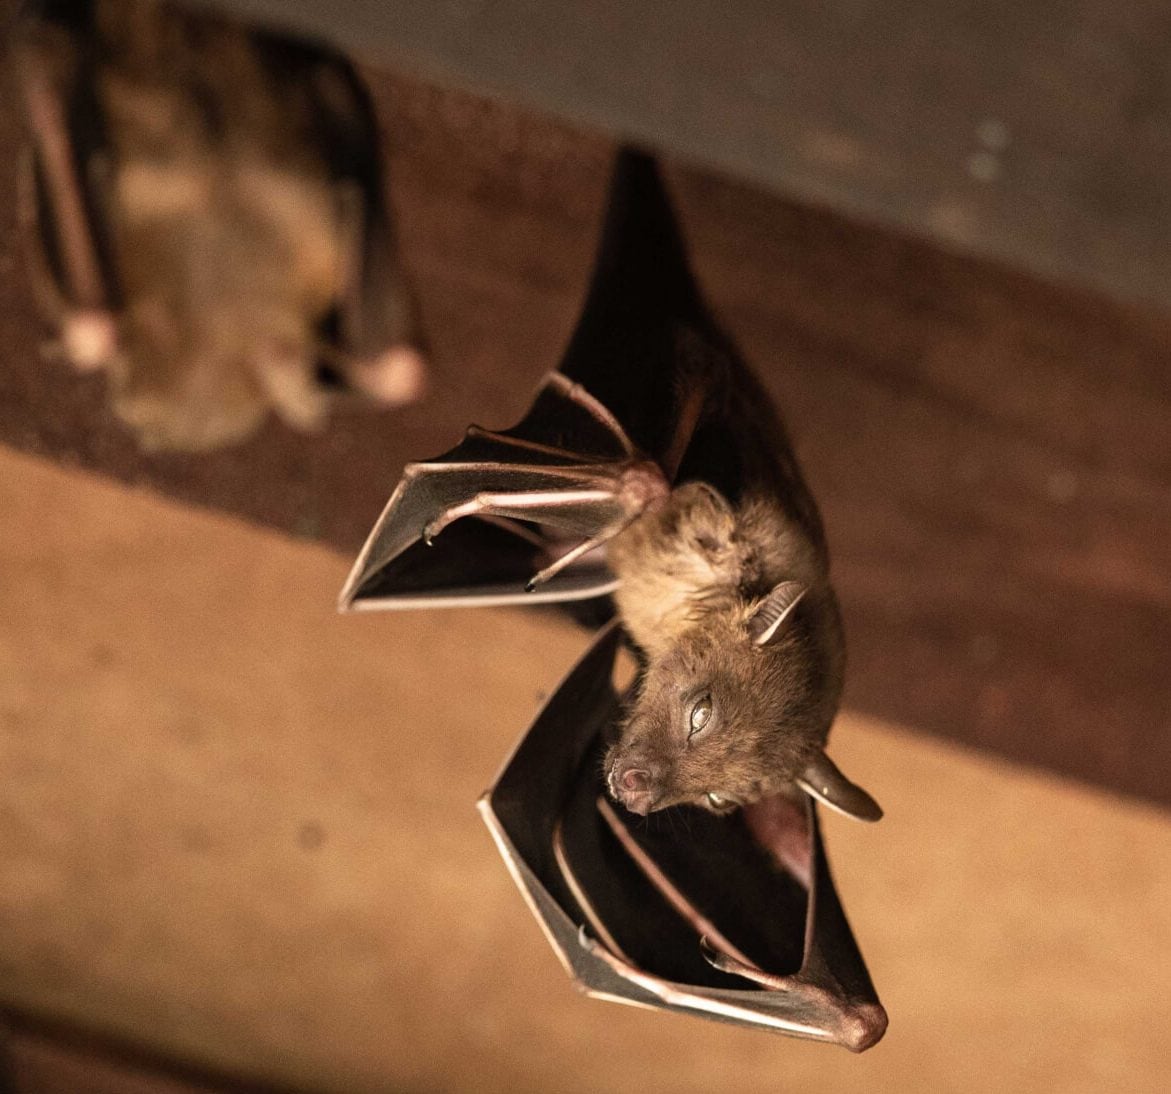 Expert bat removal services for a safe and humane solution in Rapid City